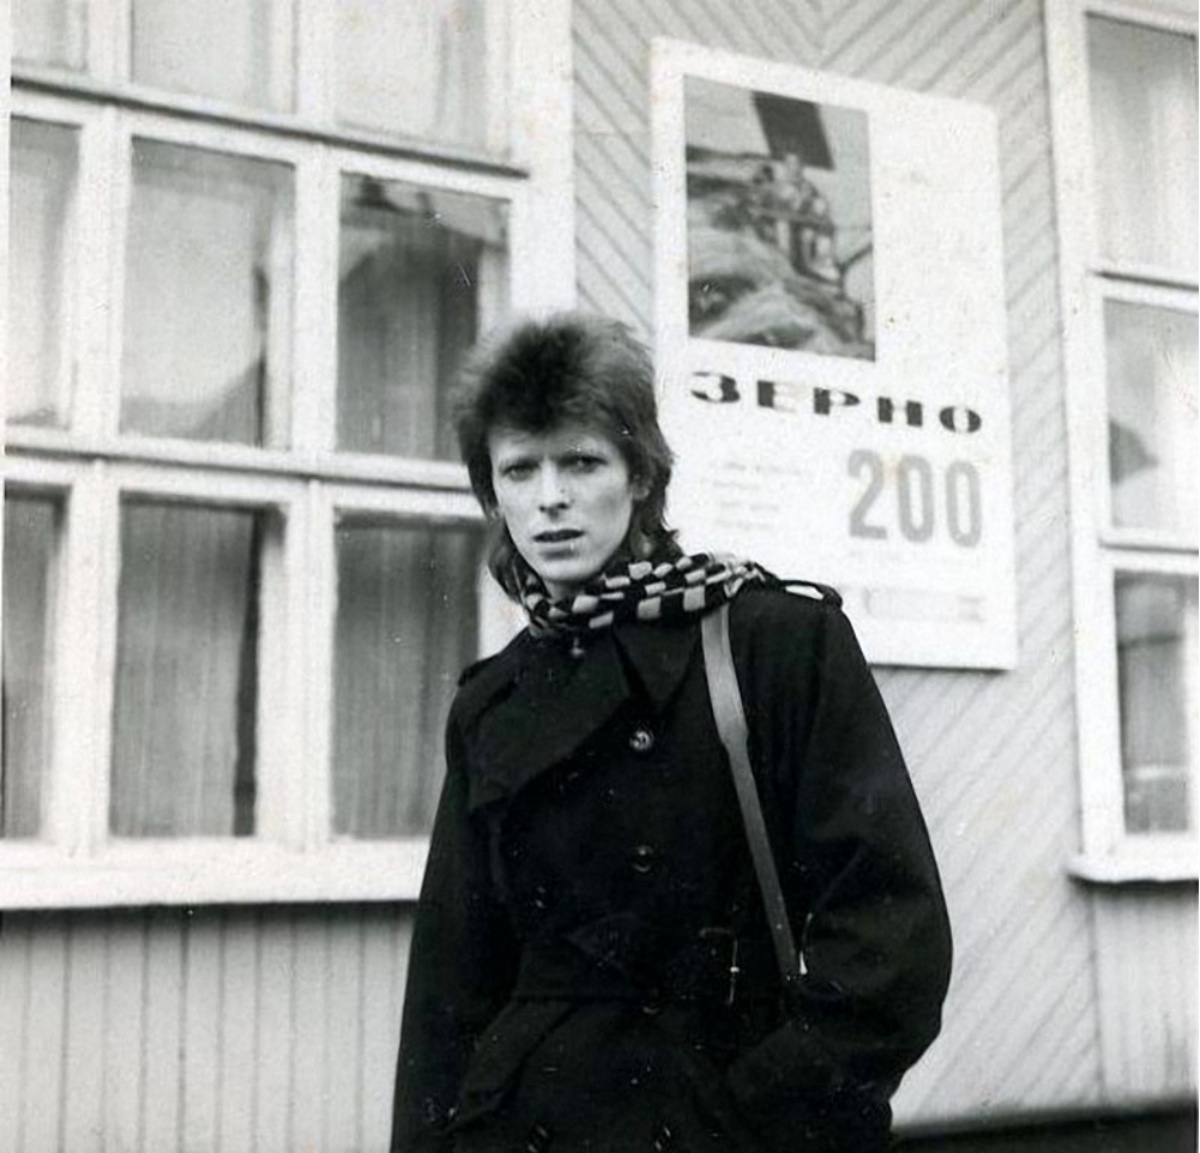 David Bowie in Chabarowsk